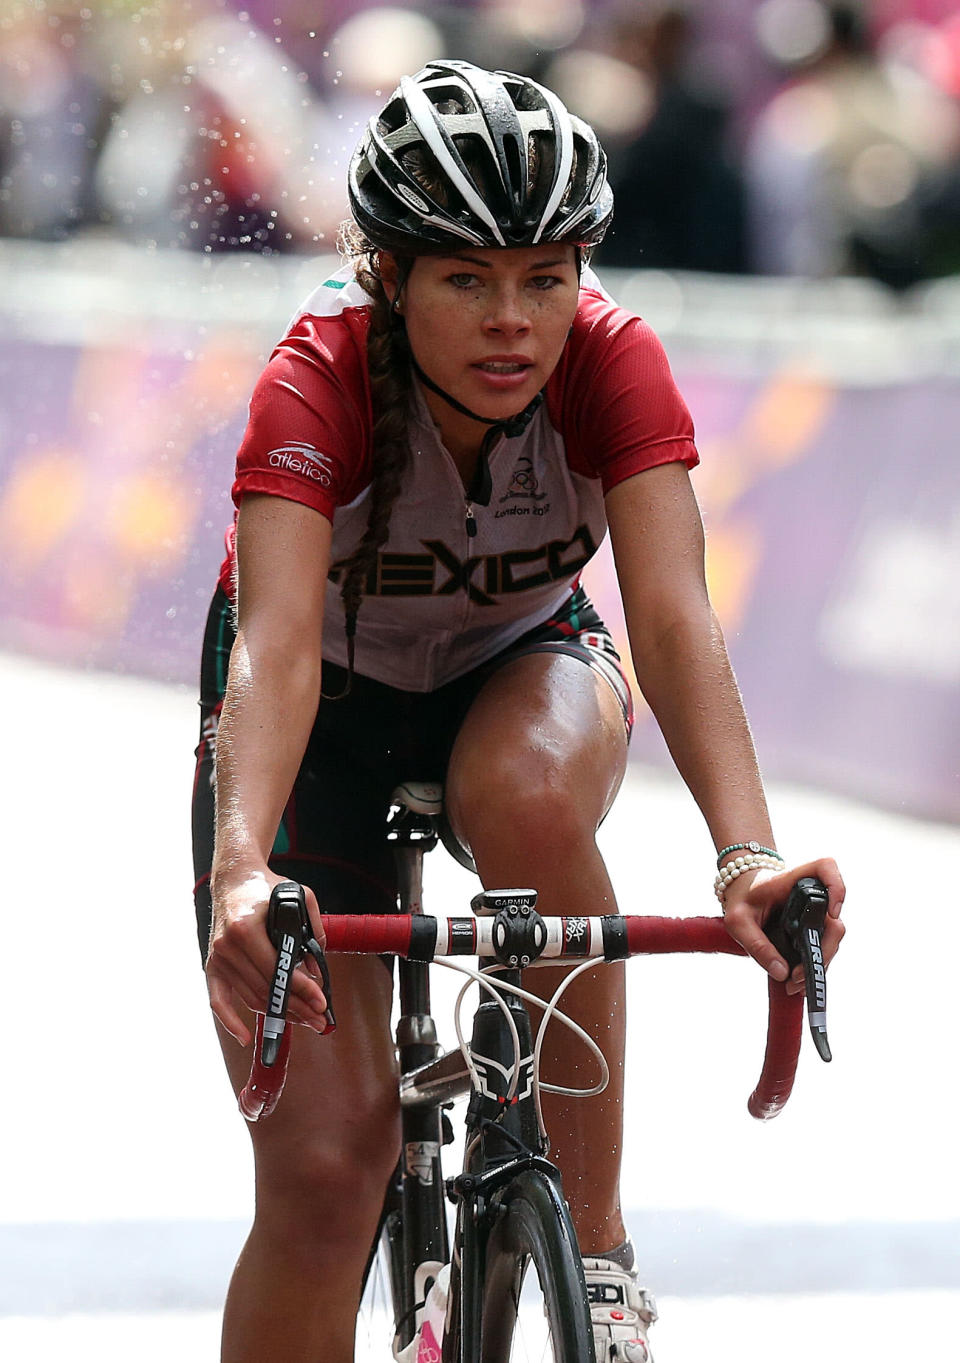 LONDON, ENGLAND - JULY 29: Ingrid Drexel of Mexico crosses the finish line during the Women's Road Race Road Cycling on day two of the London 2012 Olympic Games on July 29, 2012 in London, England (Photo by Bryn Lennon/Getty Images)